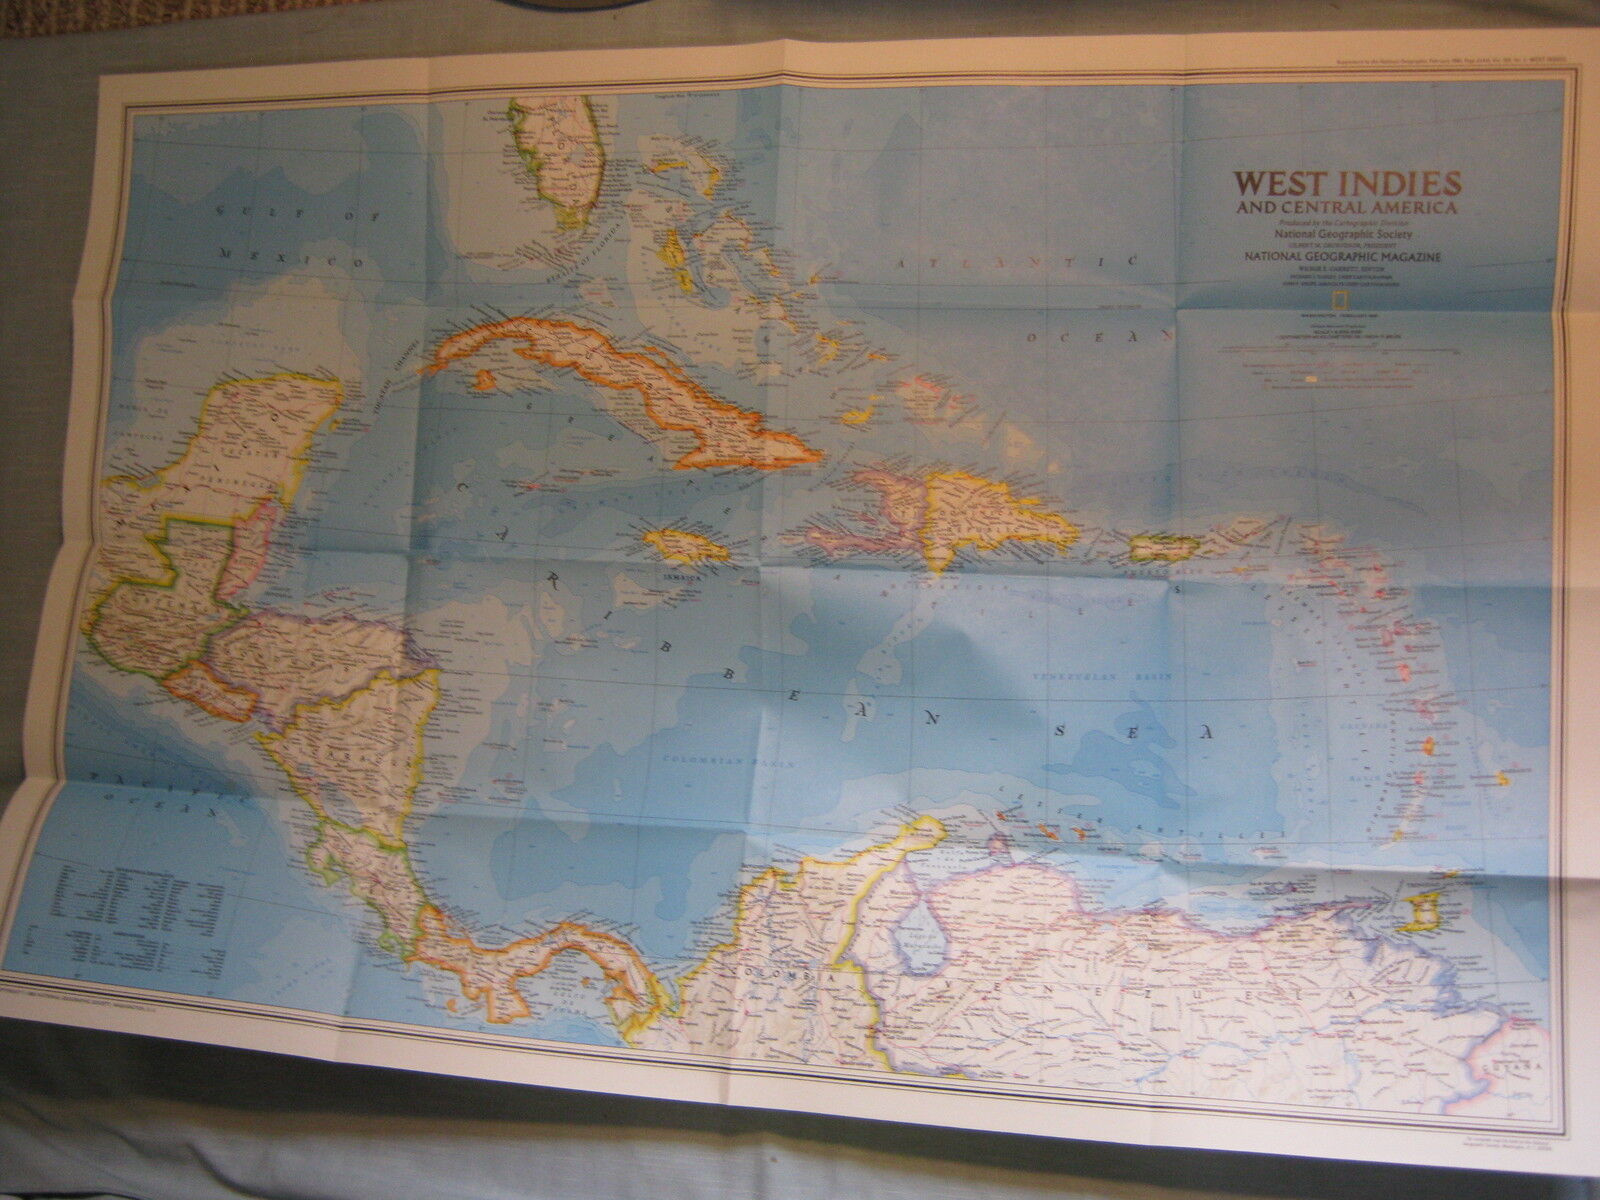 WEST INDIES CENTRAL AMERICA CARIBBEAN ISLANDS MAP National Geographic Feb. 1981